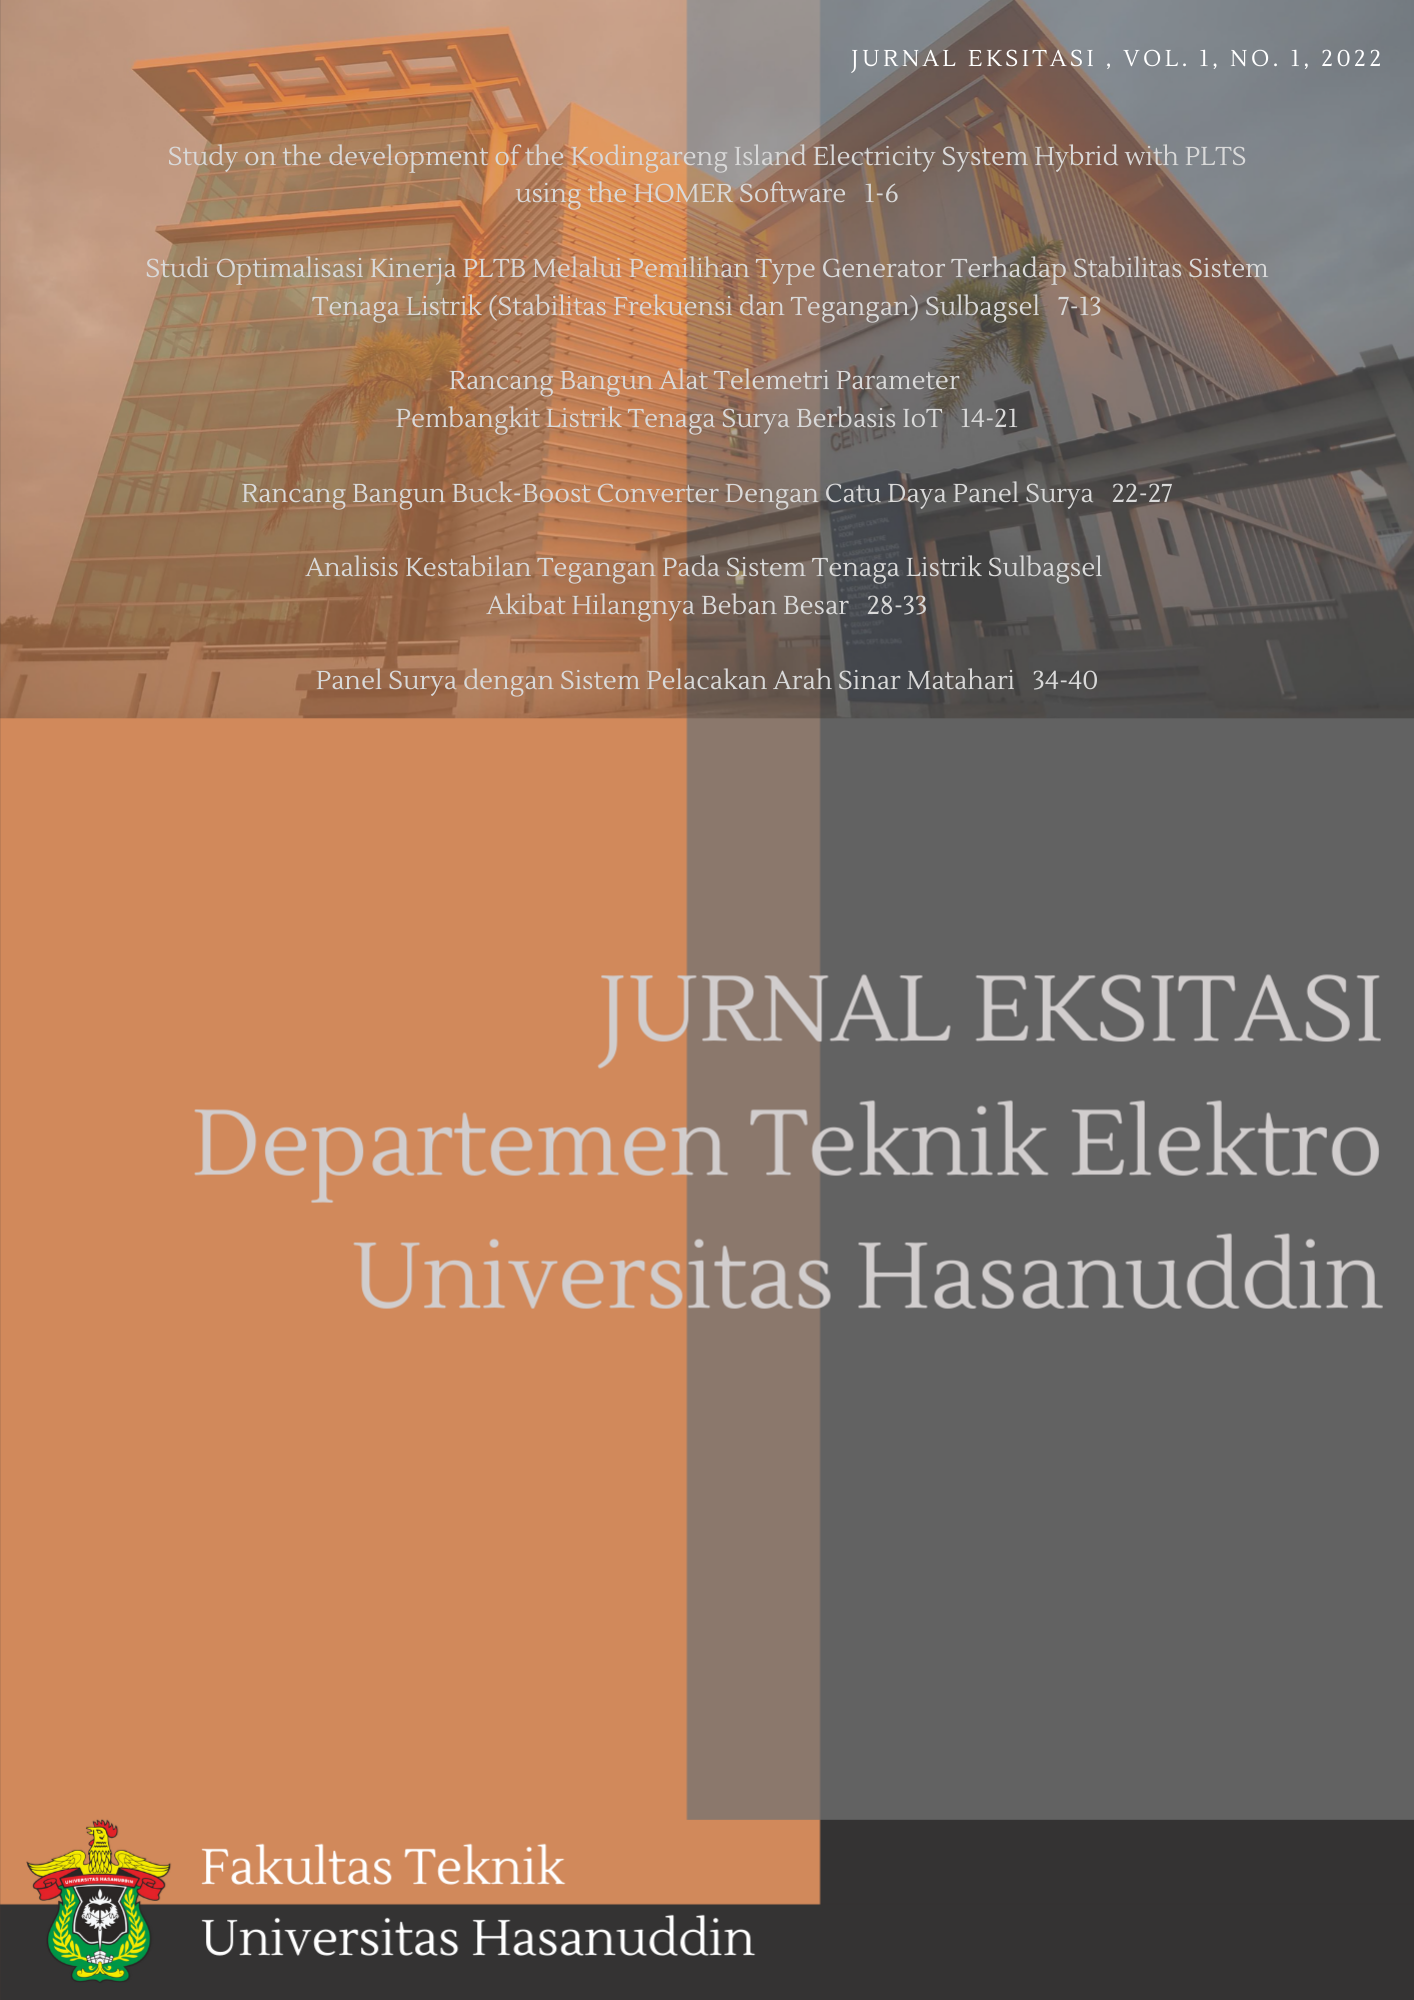 					View Vol. 1 No. 1 (2022): Journal of Excitation of the Department of Electrical Engineering. Vol. 1. No. 1. 2022
				